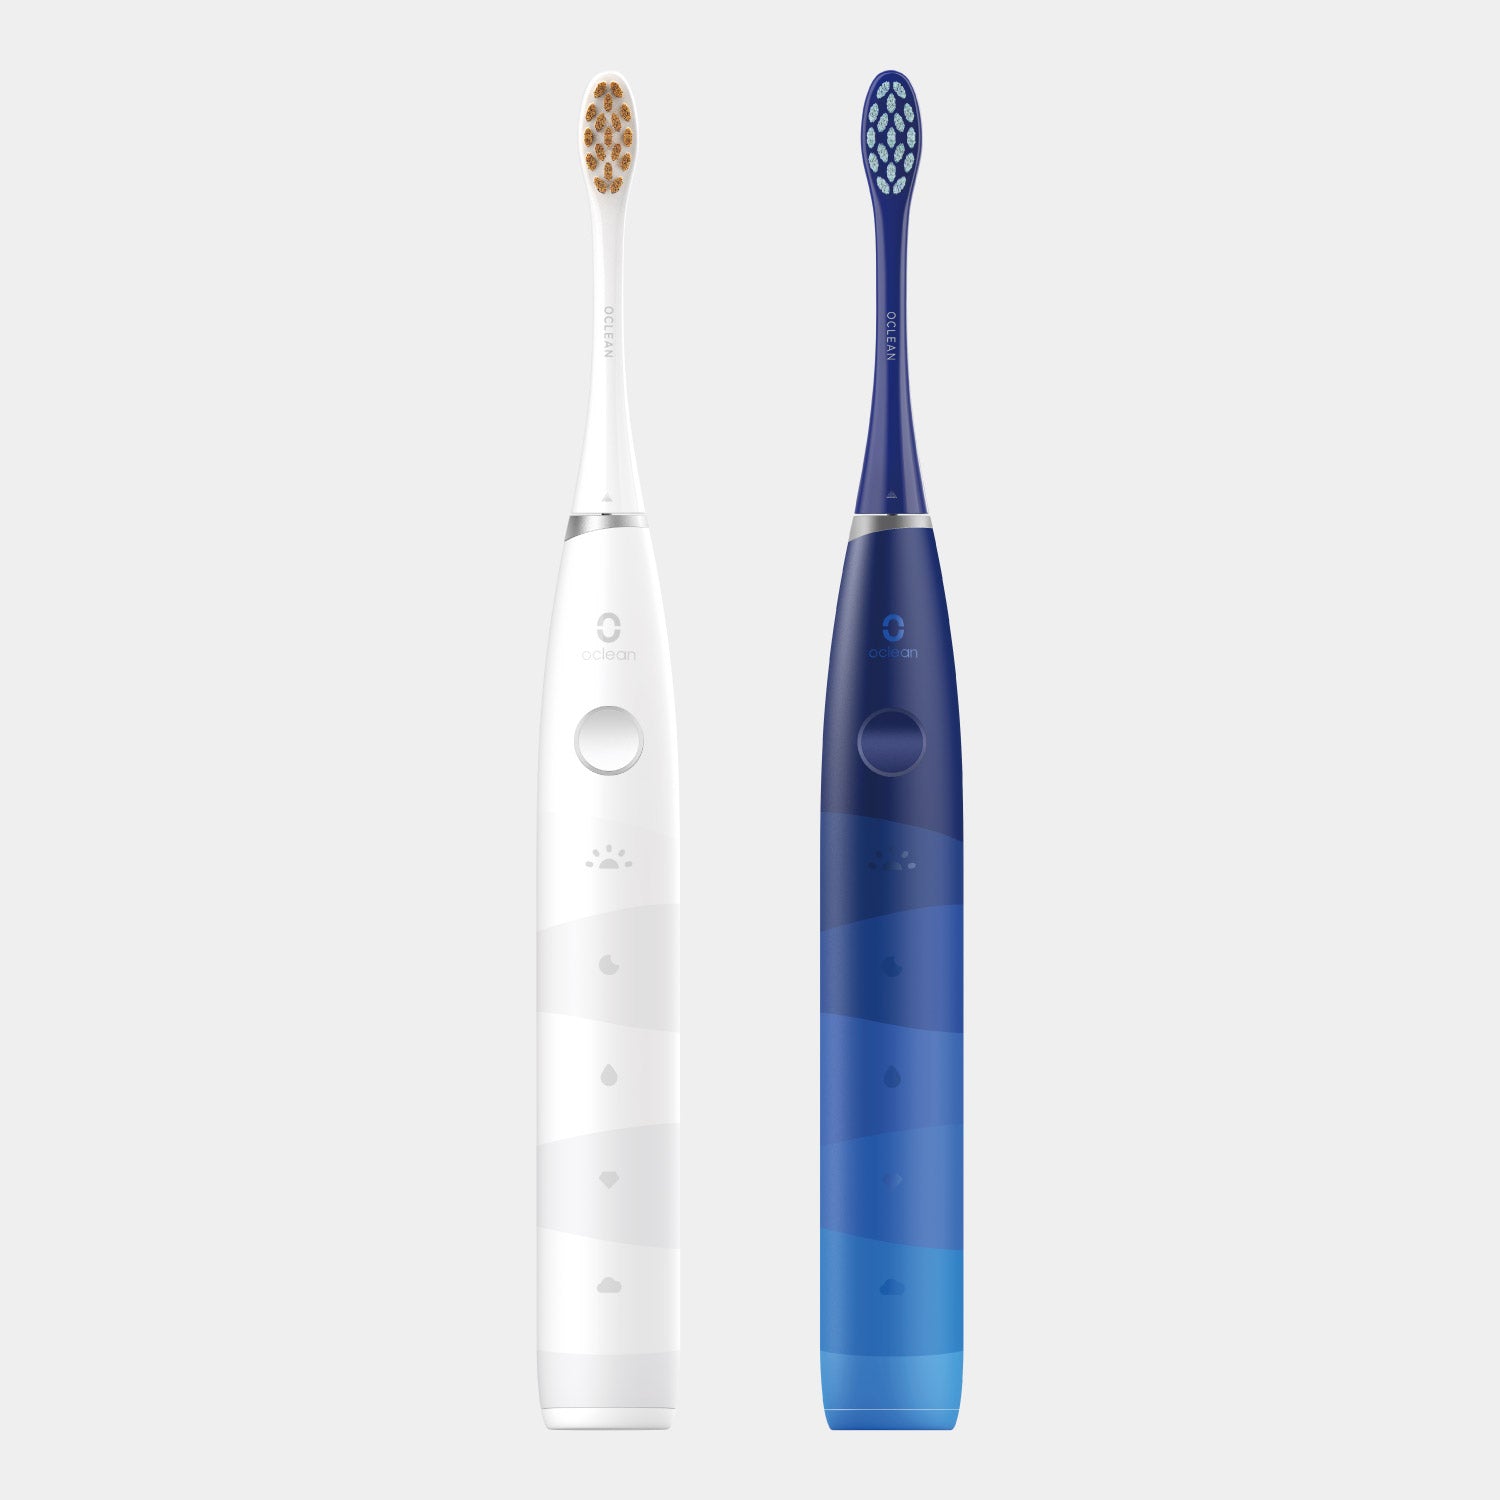 Oclean Flow Electric Toothbrush-Toothbrushes-Oclean Global Store